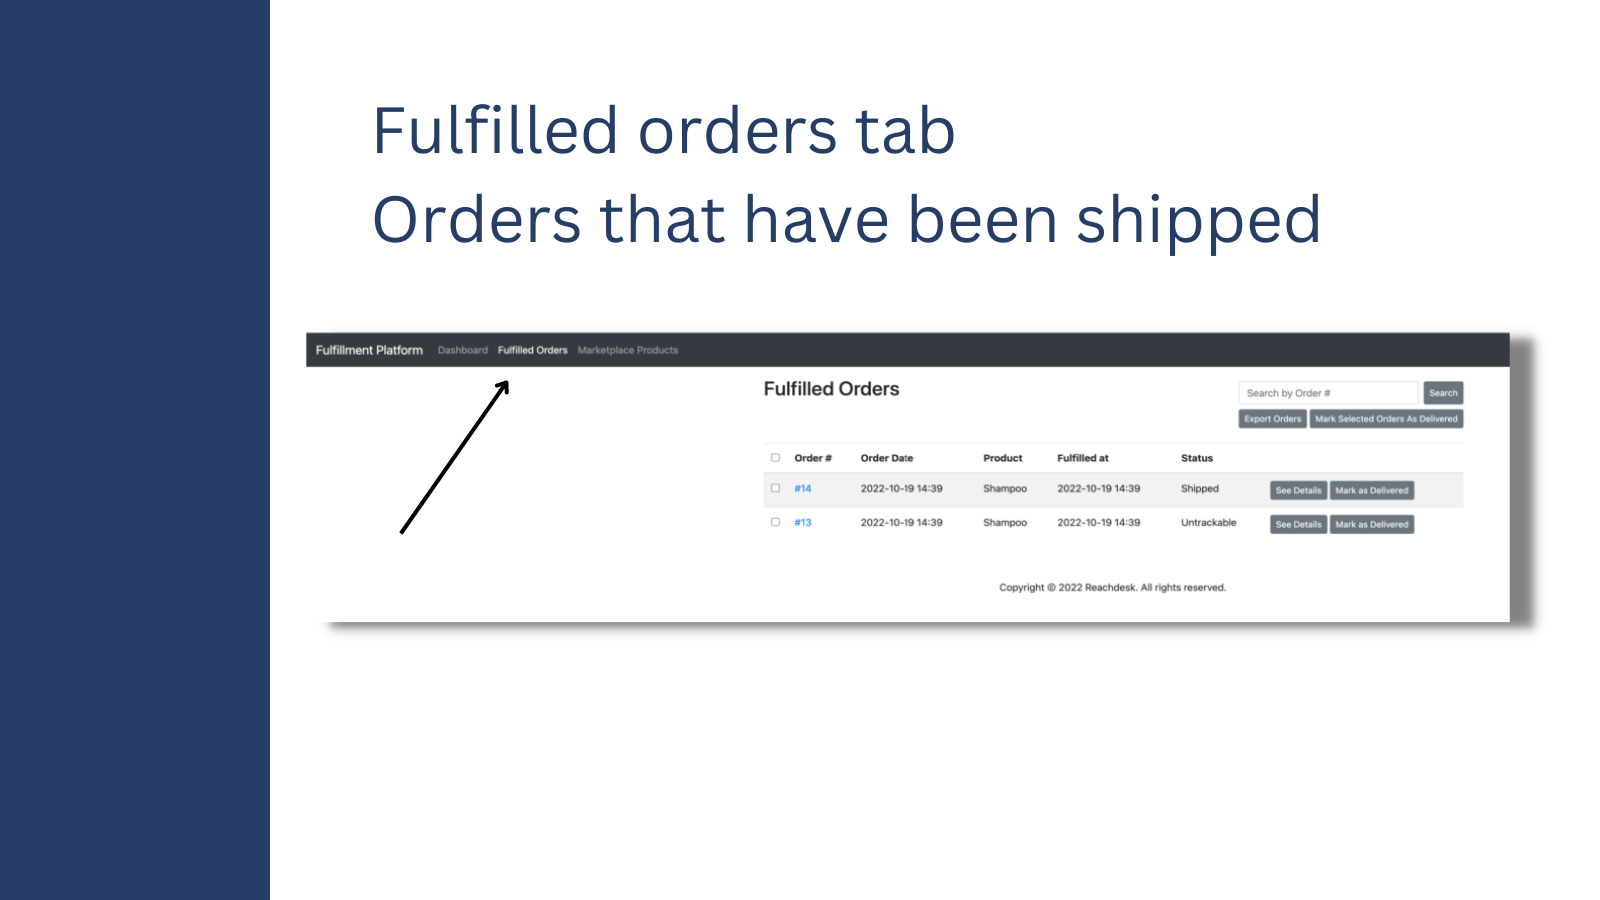 Fulfilled orders tab - Orders that have been shipped